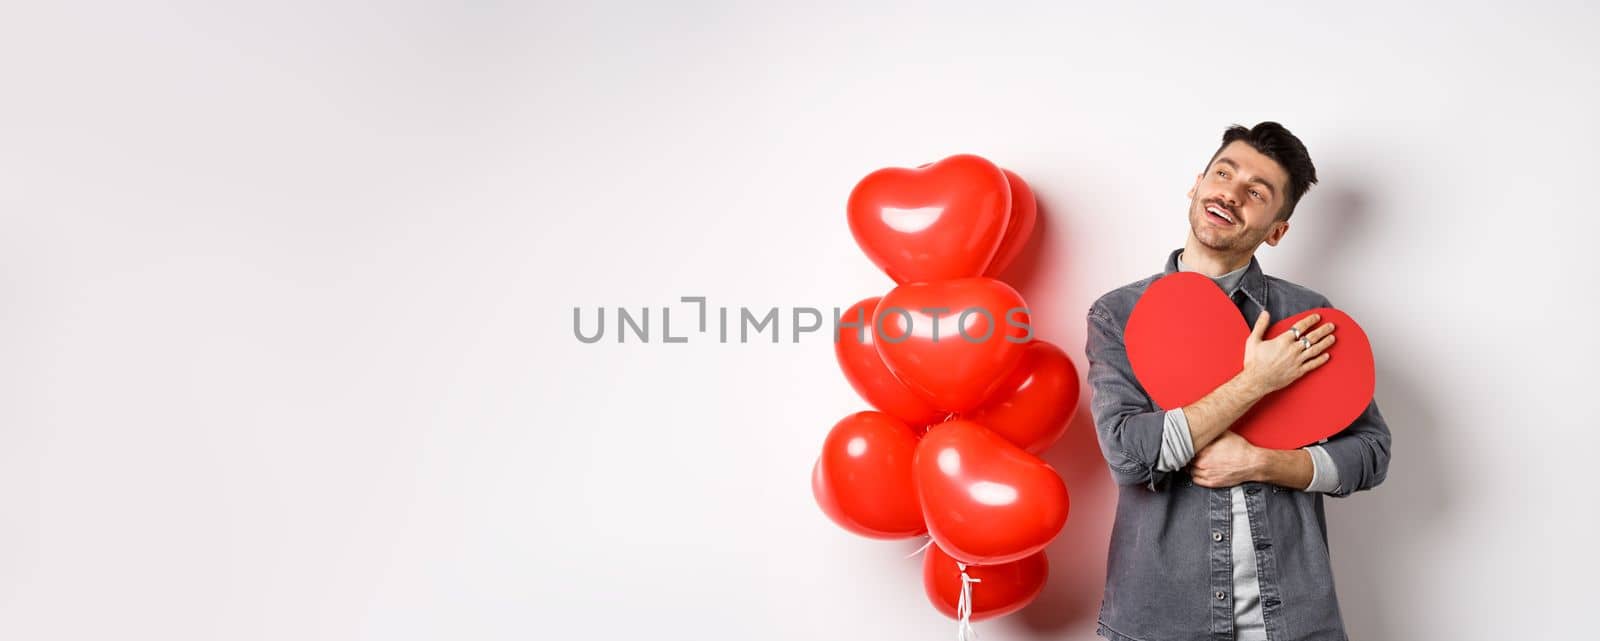 Romantic man hugging big red heart cutout and looking away dreamy, thinking of girlfriend and valentines day, imaging lover, standing on white background.